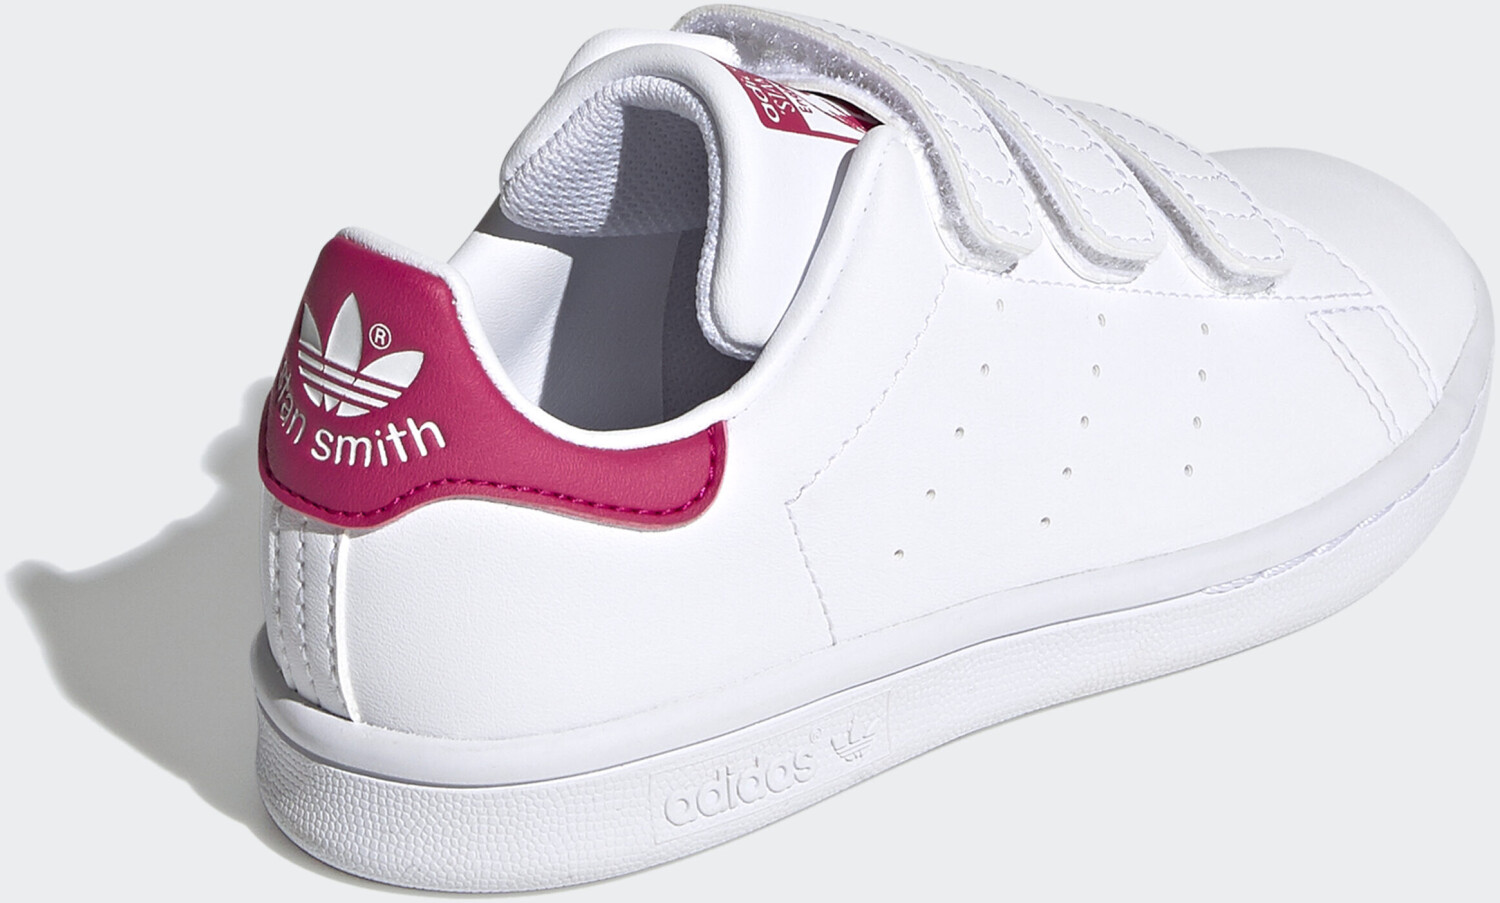 Kinder – Stan Adidas (Today) Best Buy Pink White/Cloud Cloud Deals £32.50 from on White/Bold Smith